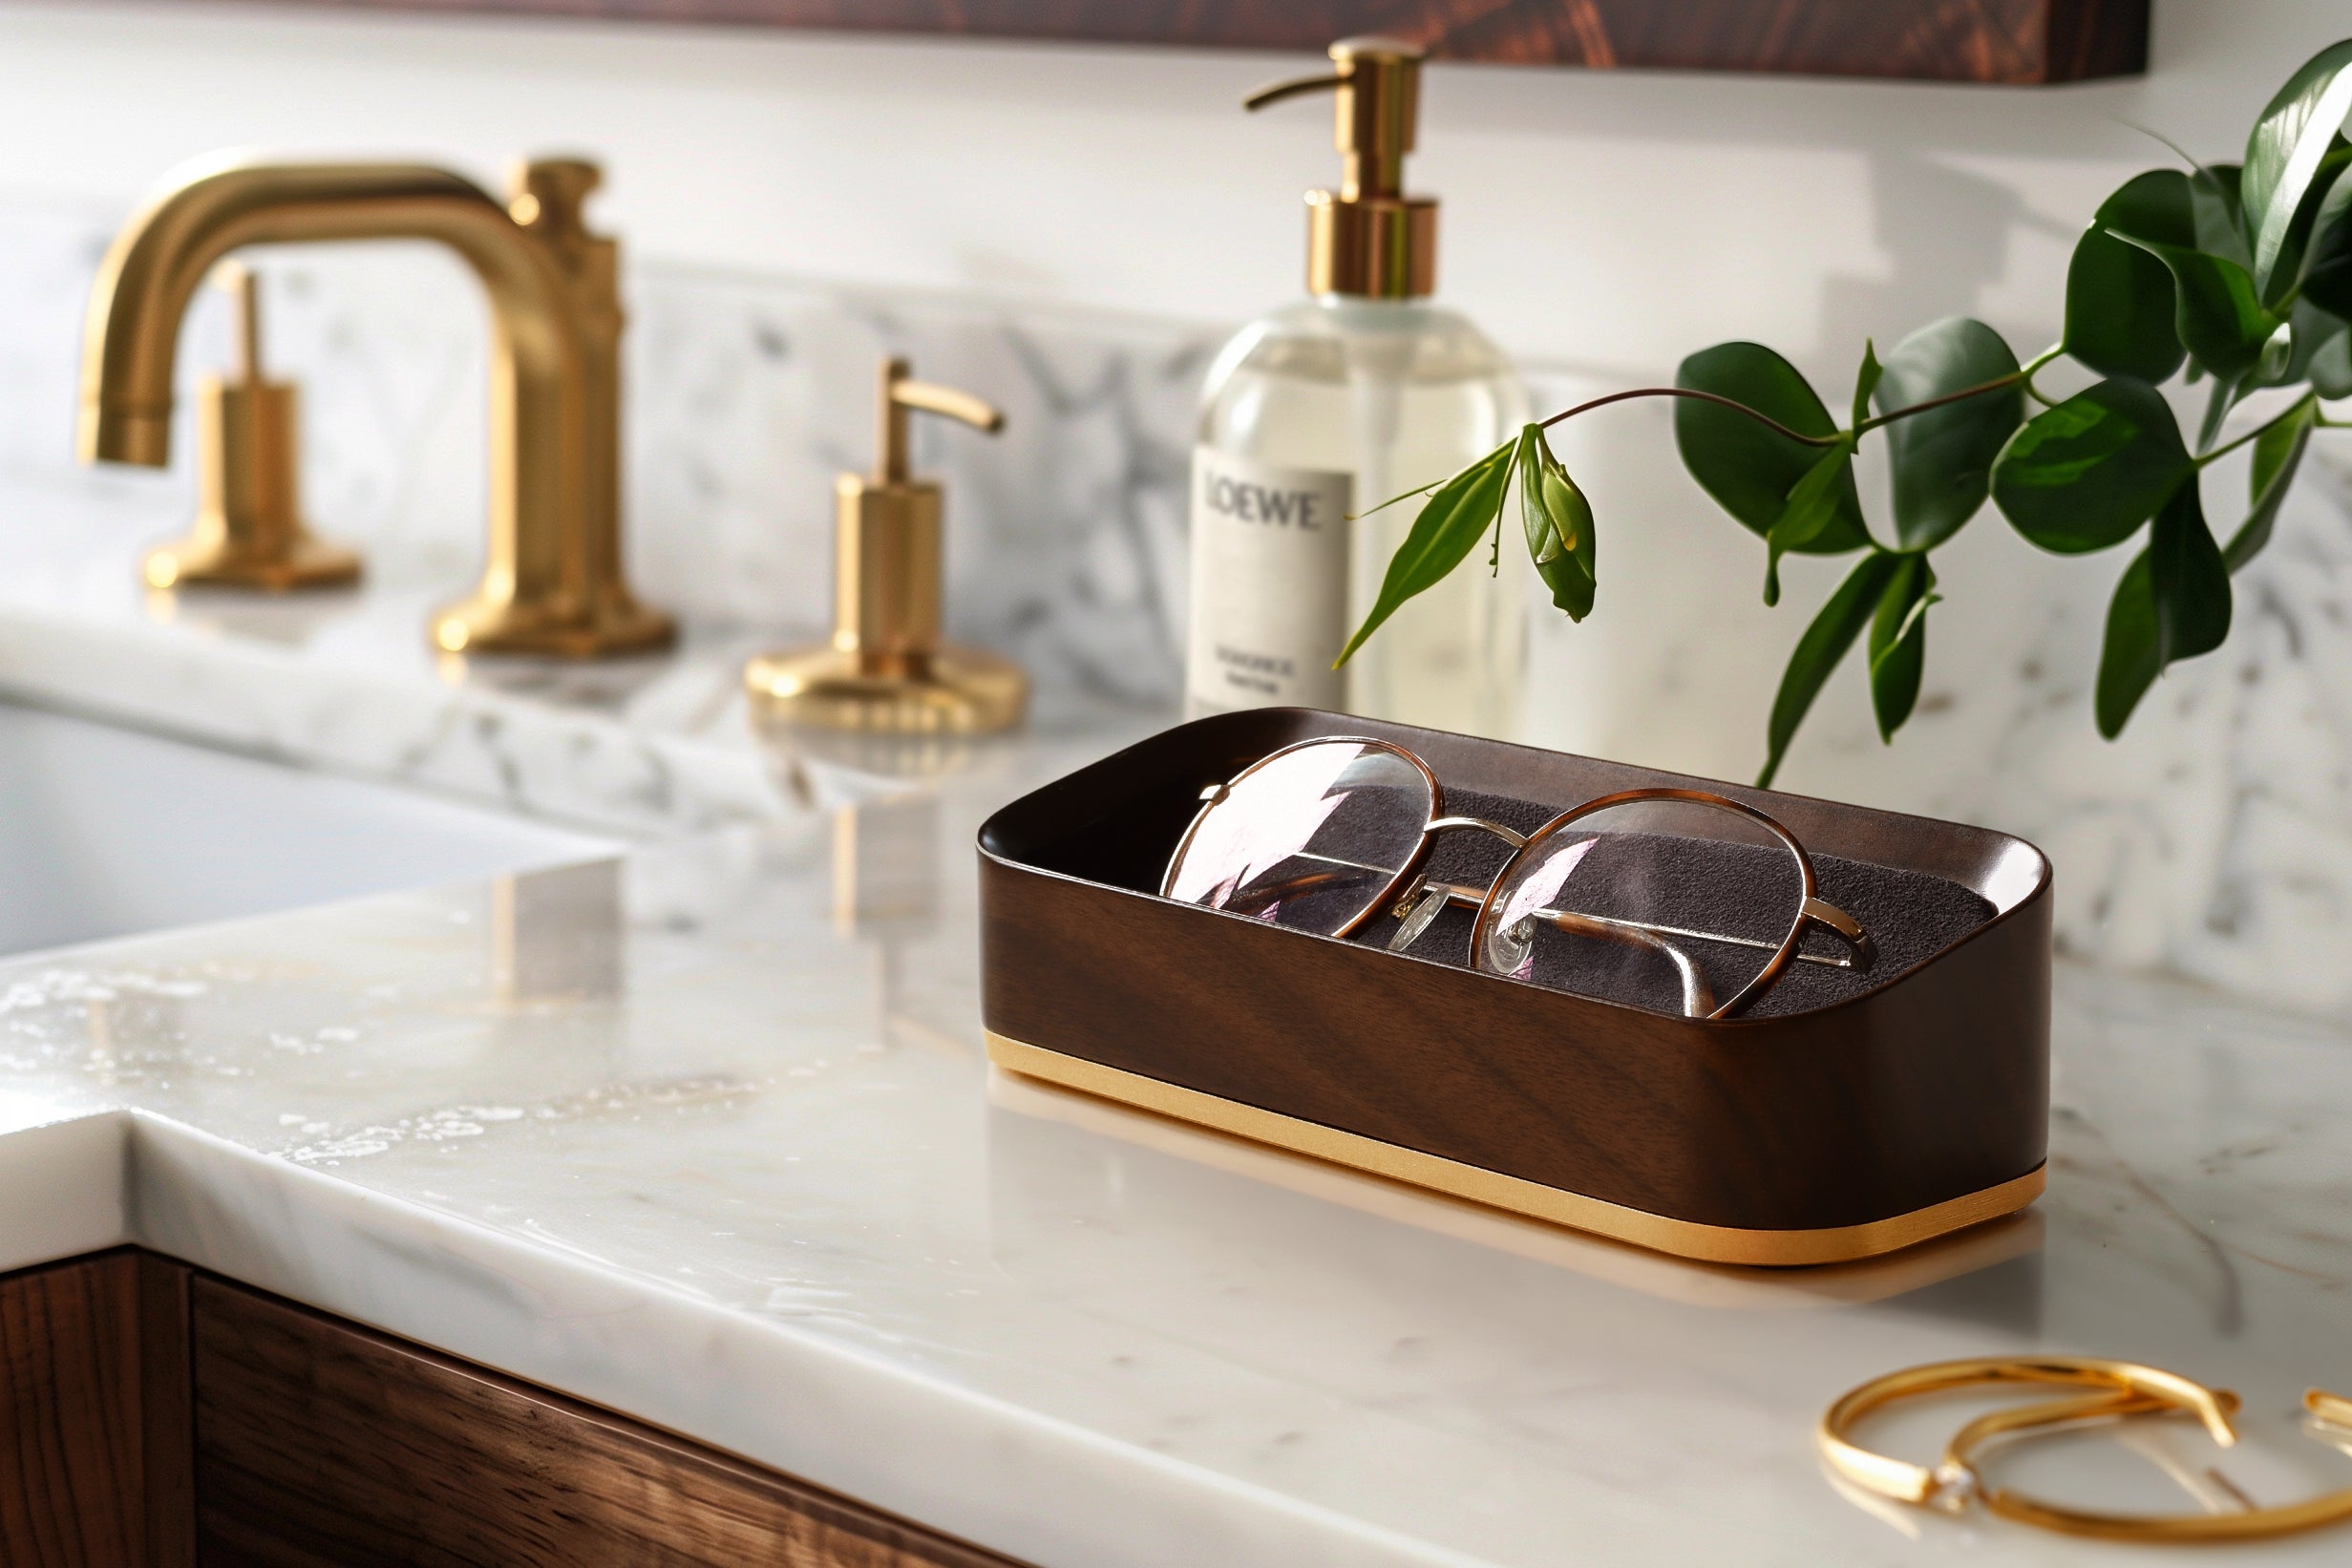 Bright Sunny Lifestyle Image of Italico Luxury Glasses Valet on a bathroom counter near a sink with glasses nested inside